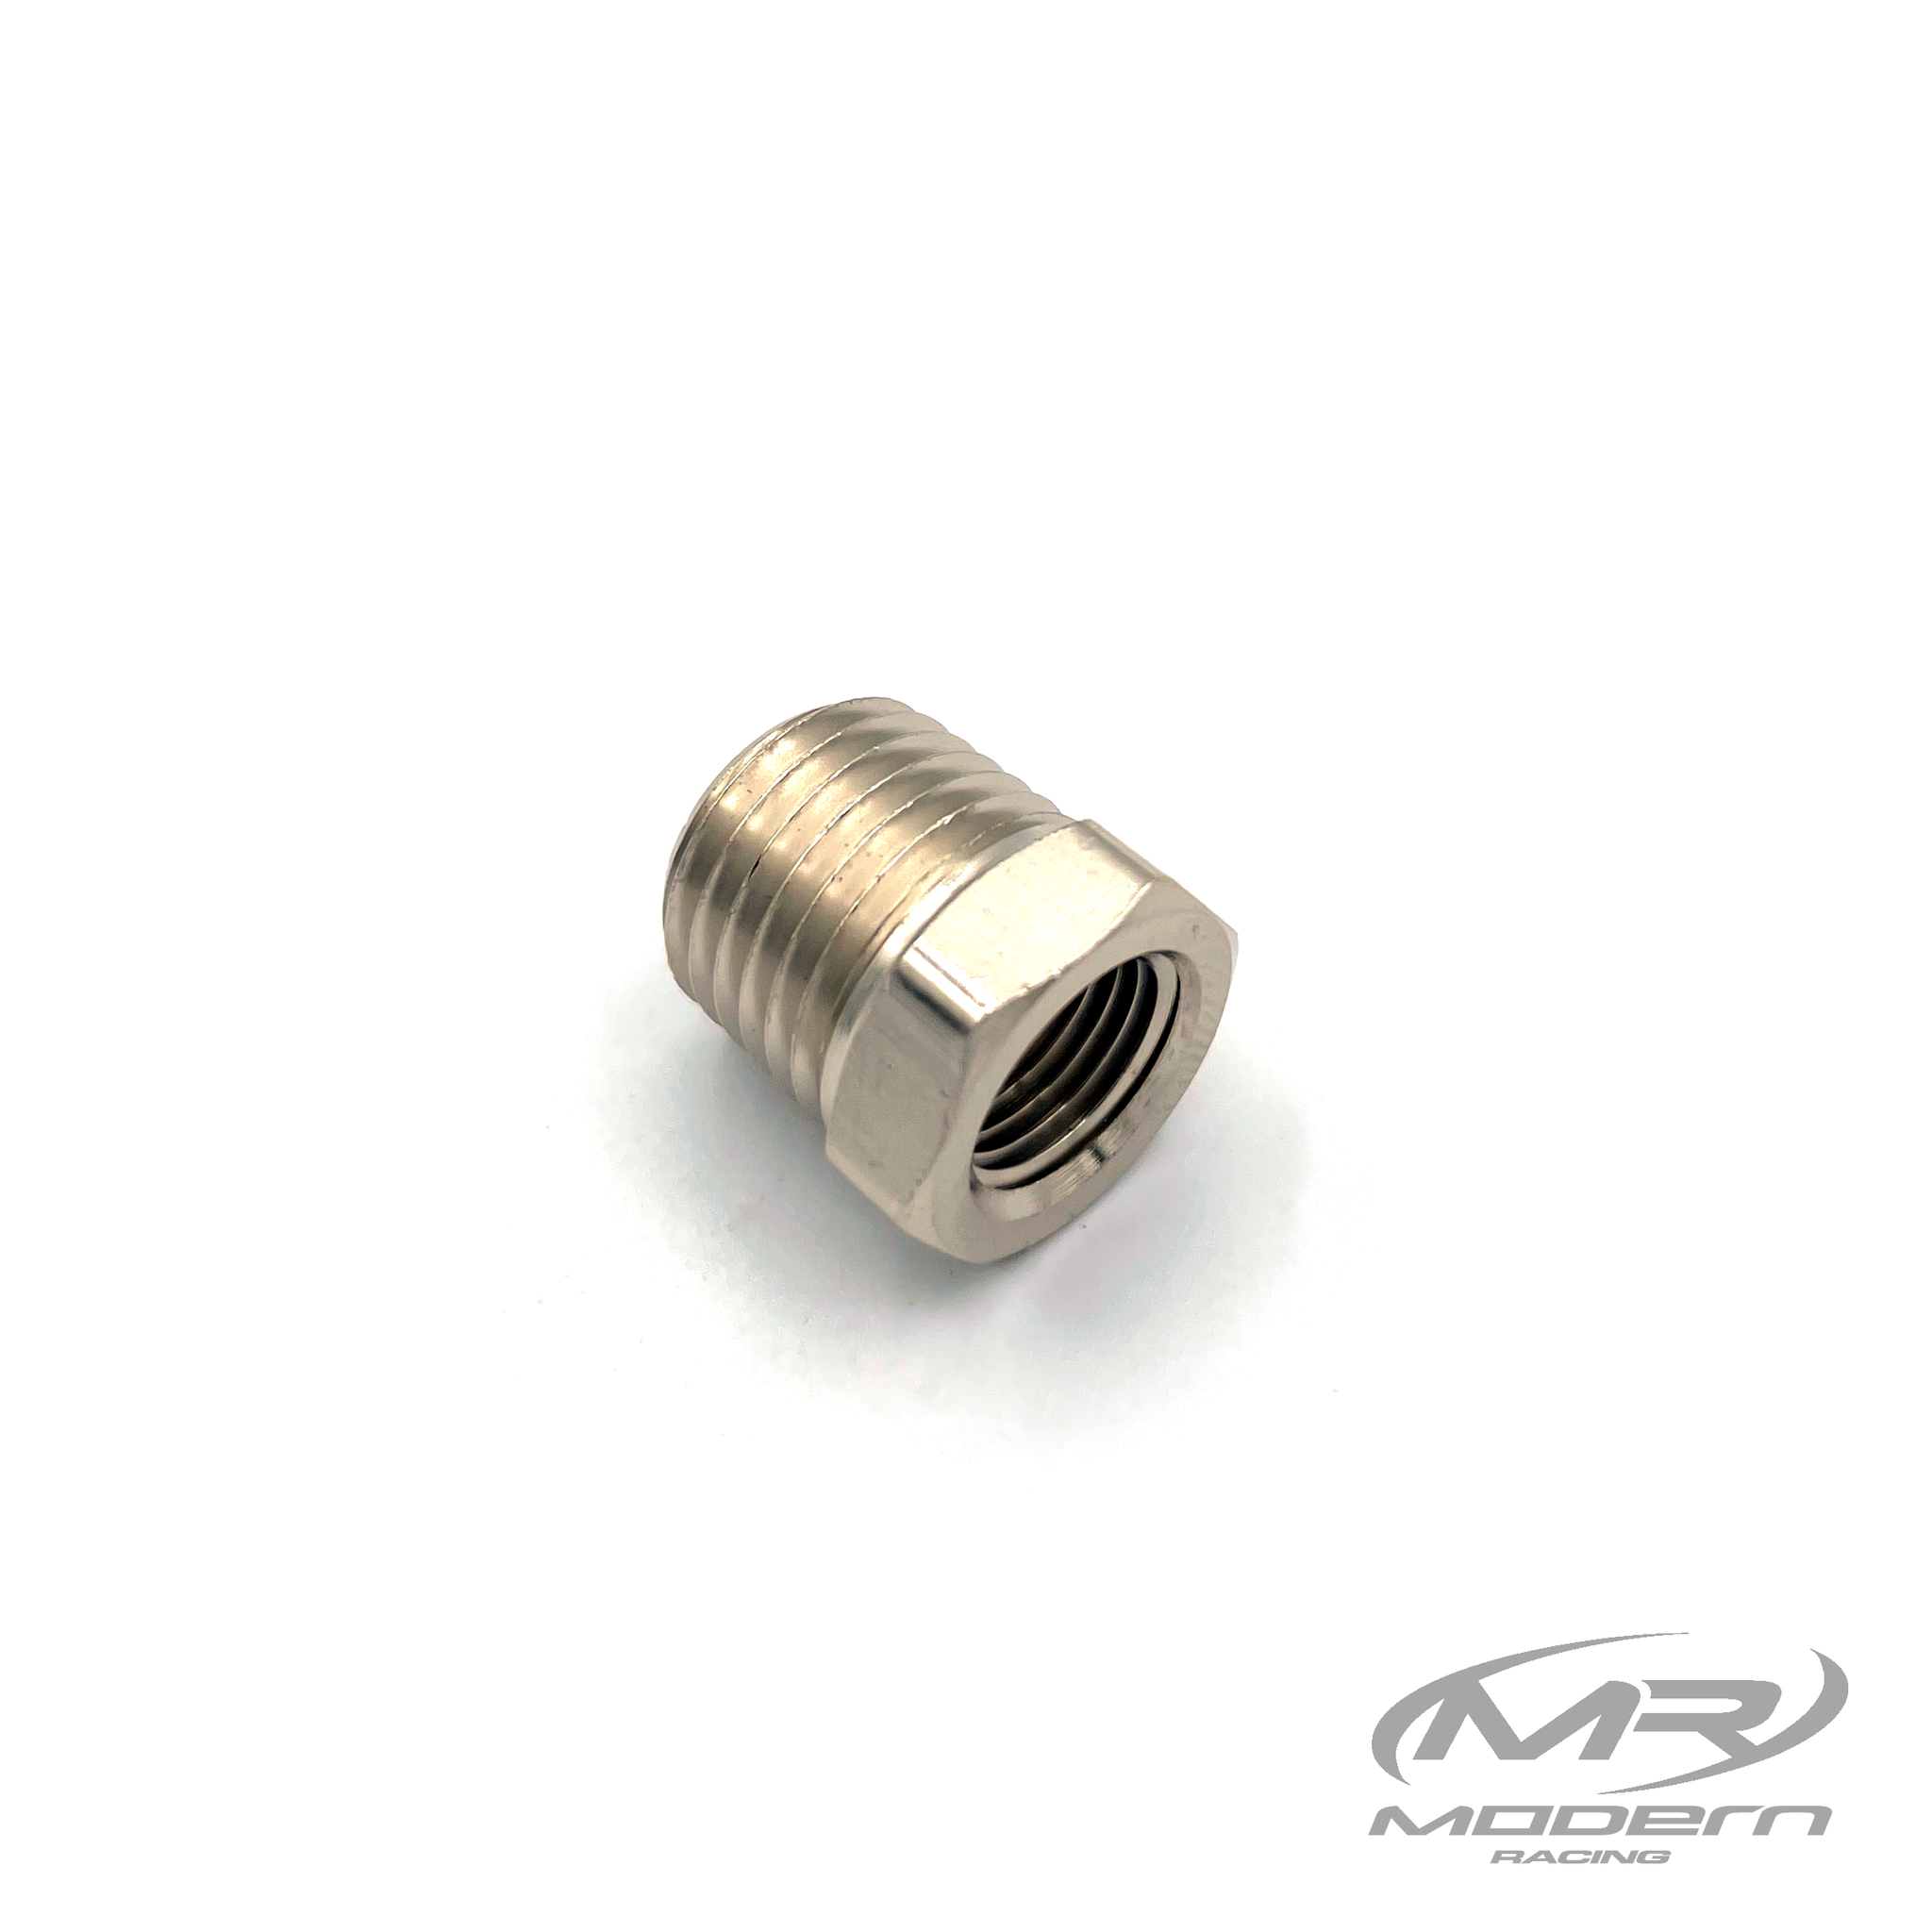 1/8" NPT Female To 1/4" NPT Male Straight Fitting Brass (Nickel Plated)